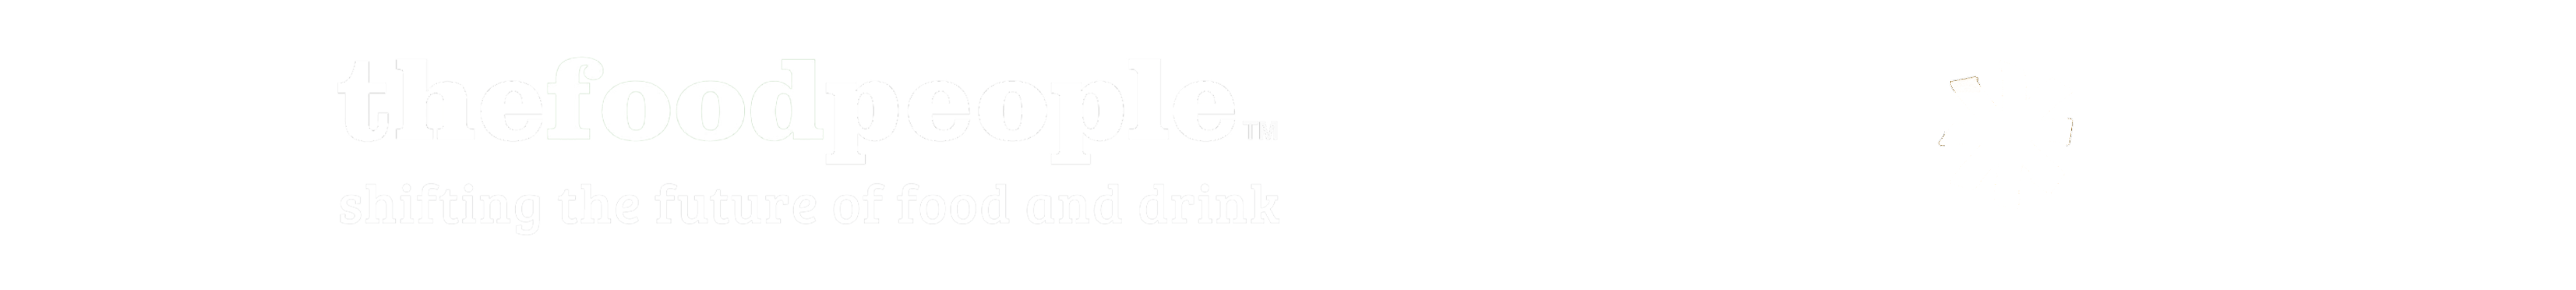 MMR thefoodpeople Huxly Together logos